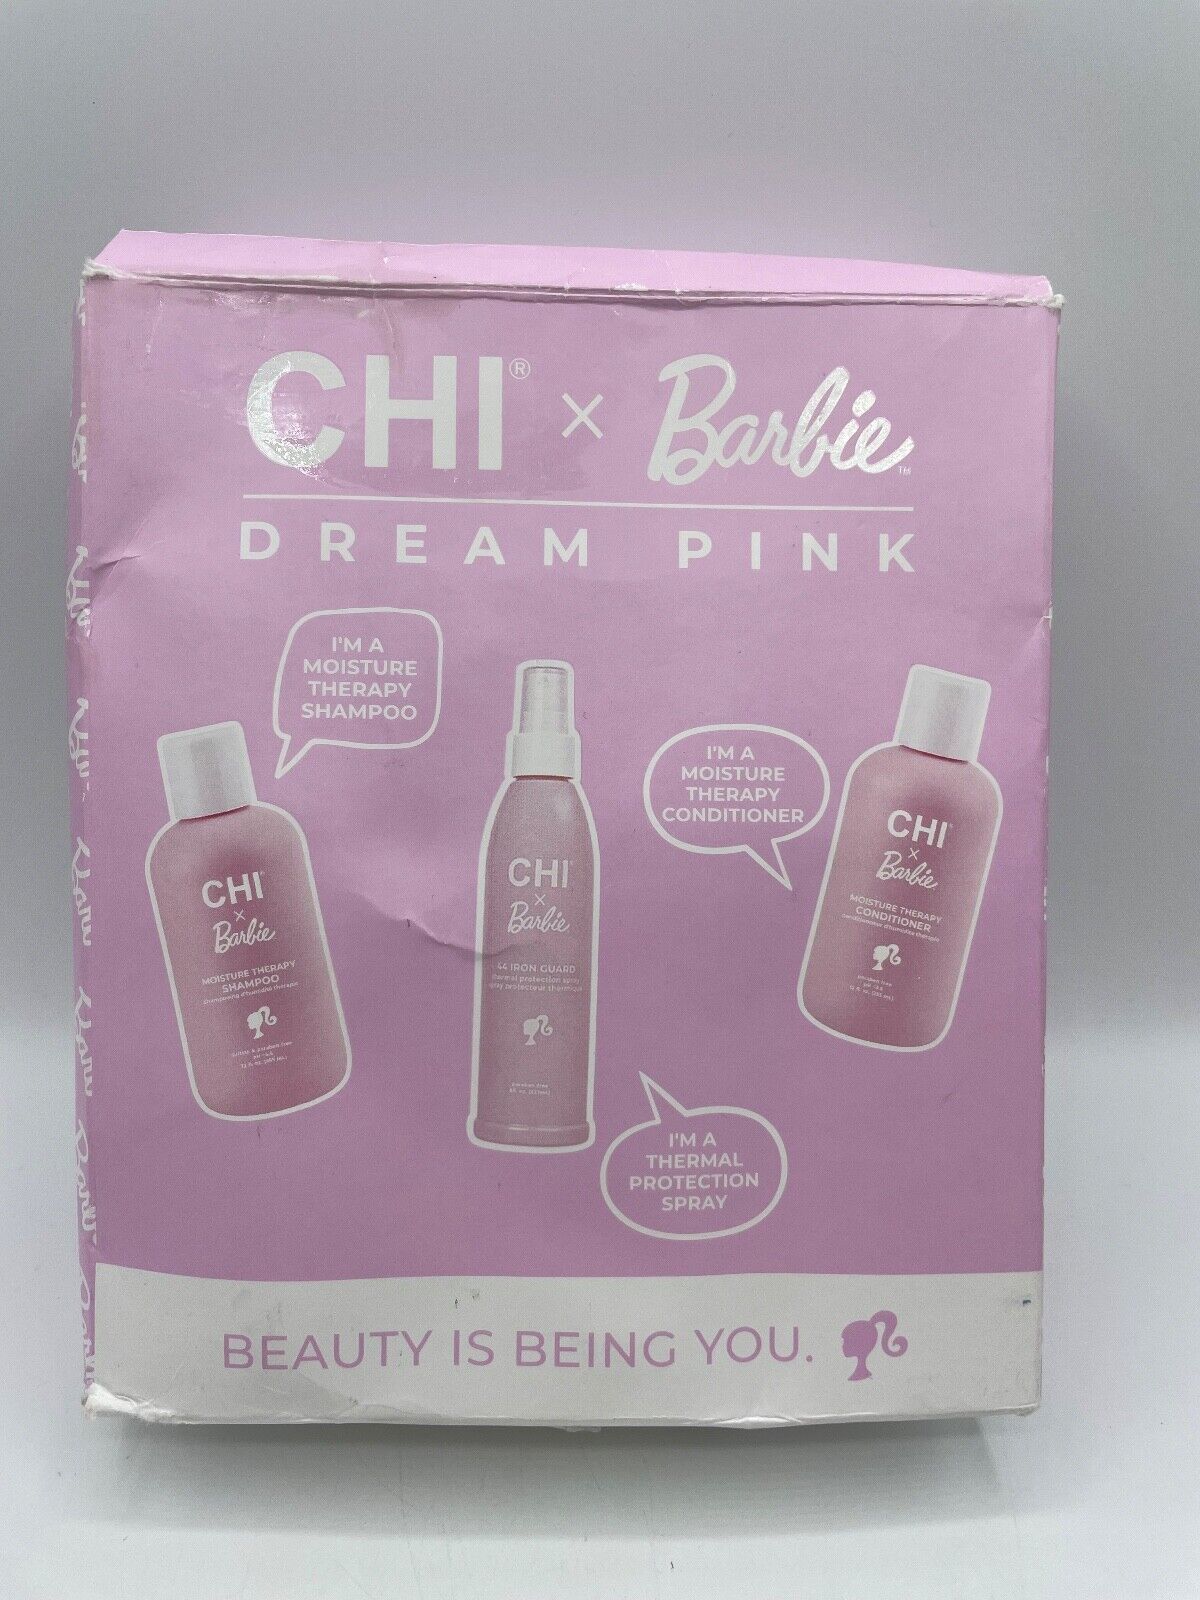 CHI x Barbie Dream Pink Hair Care Boxed Set NEW Shampoo Conditioner Heat Bs264 - $44.87